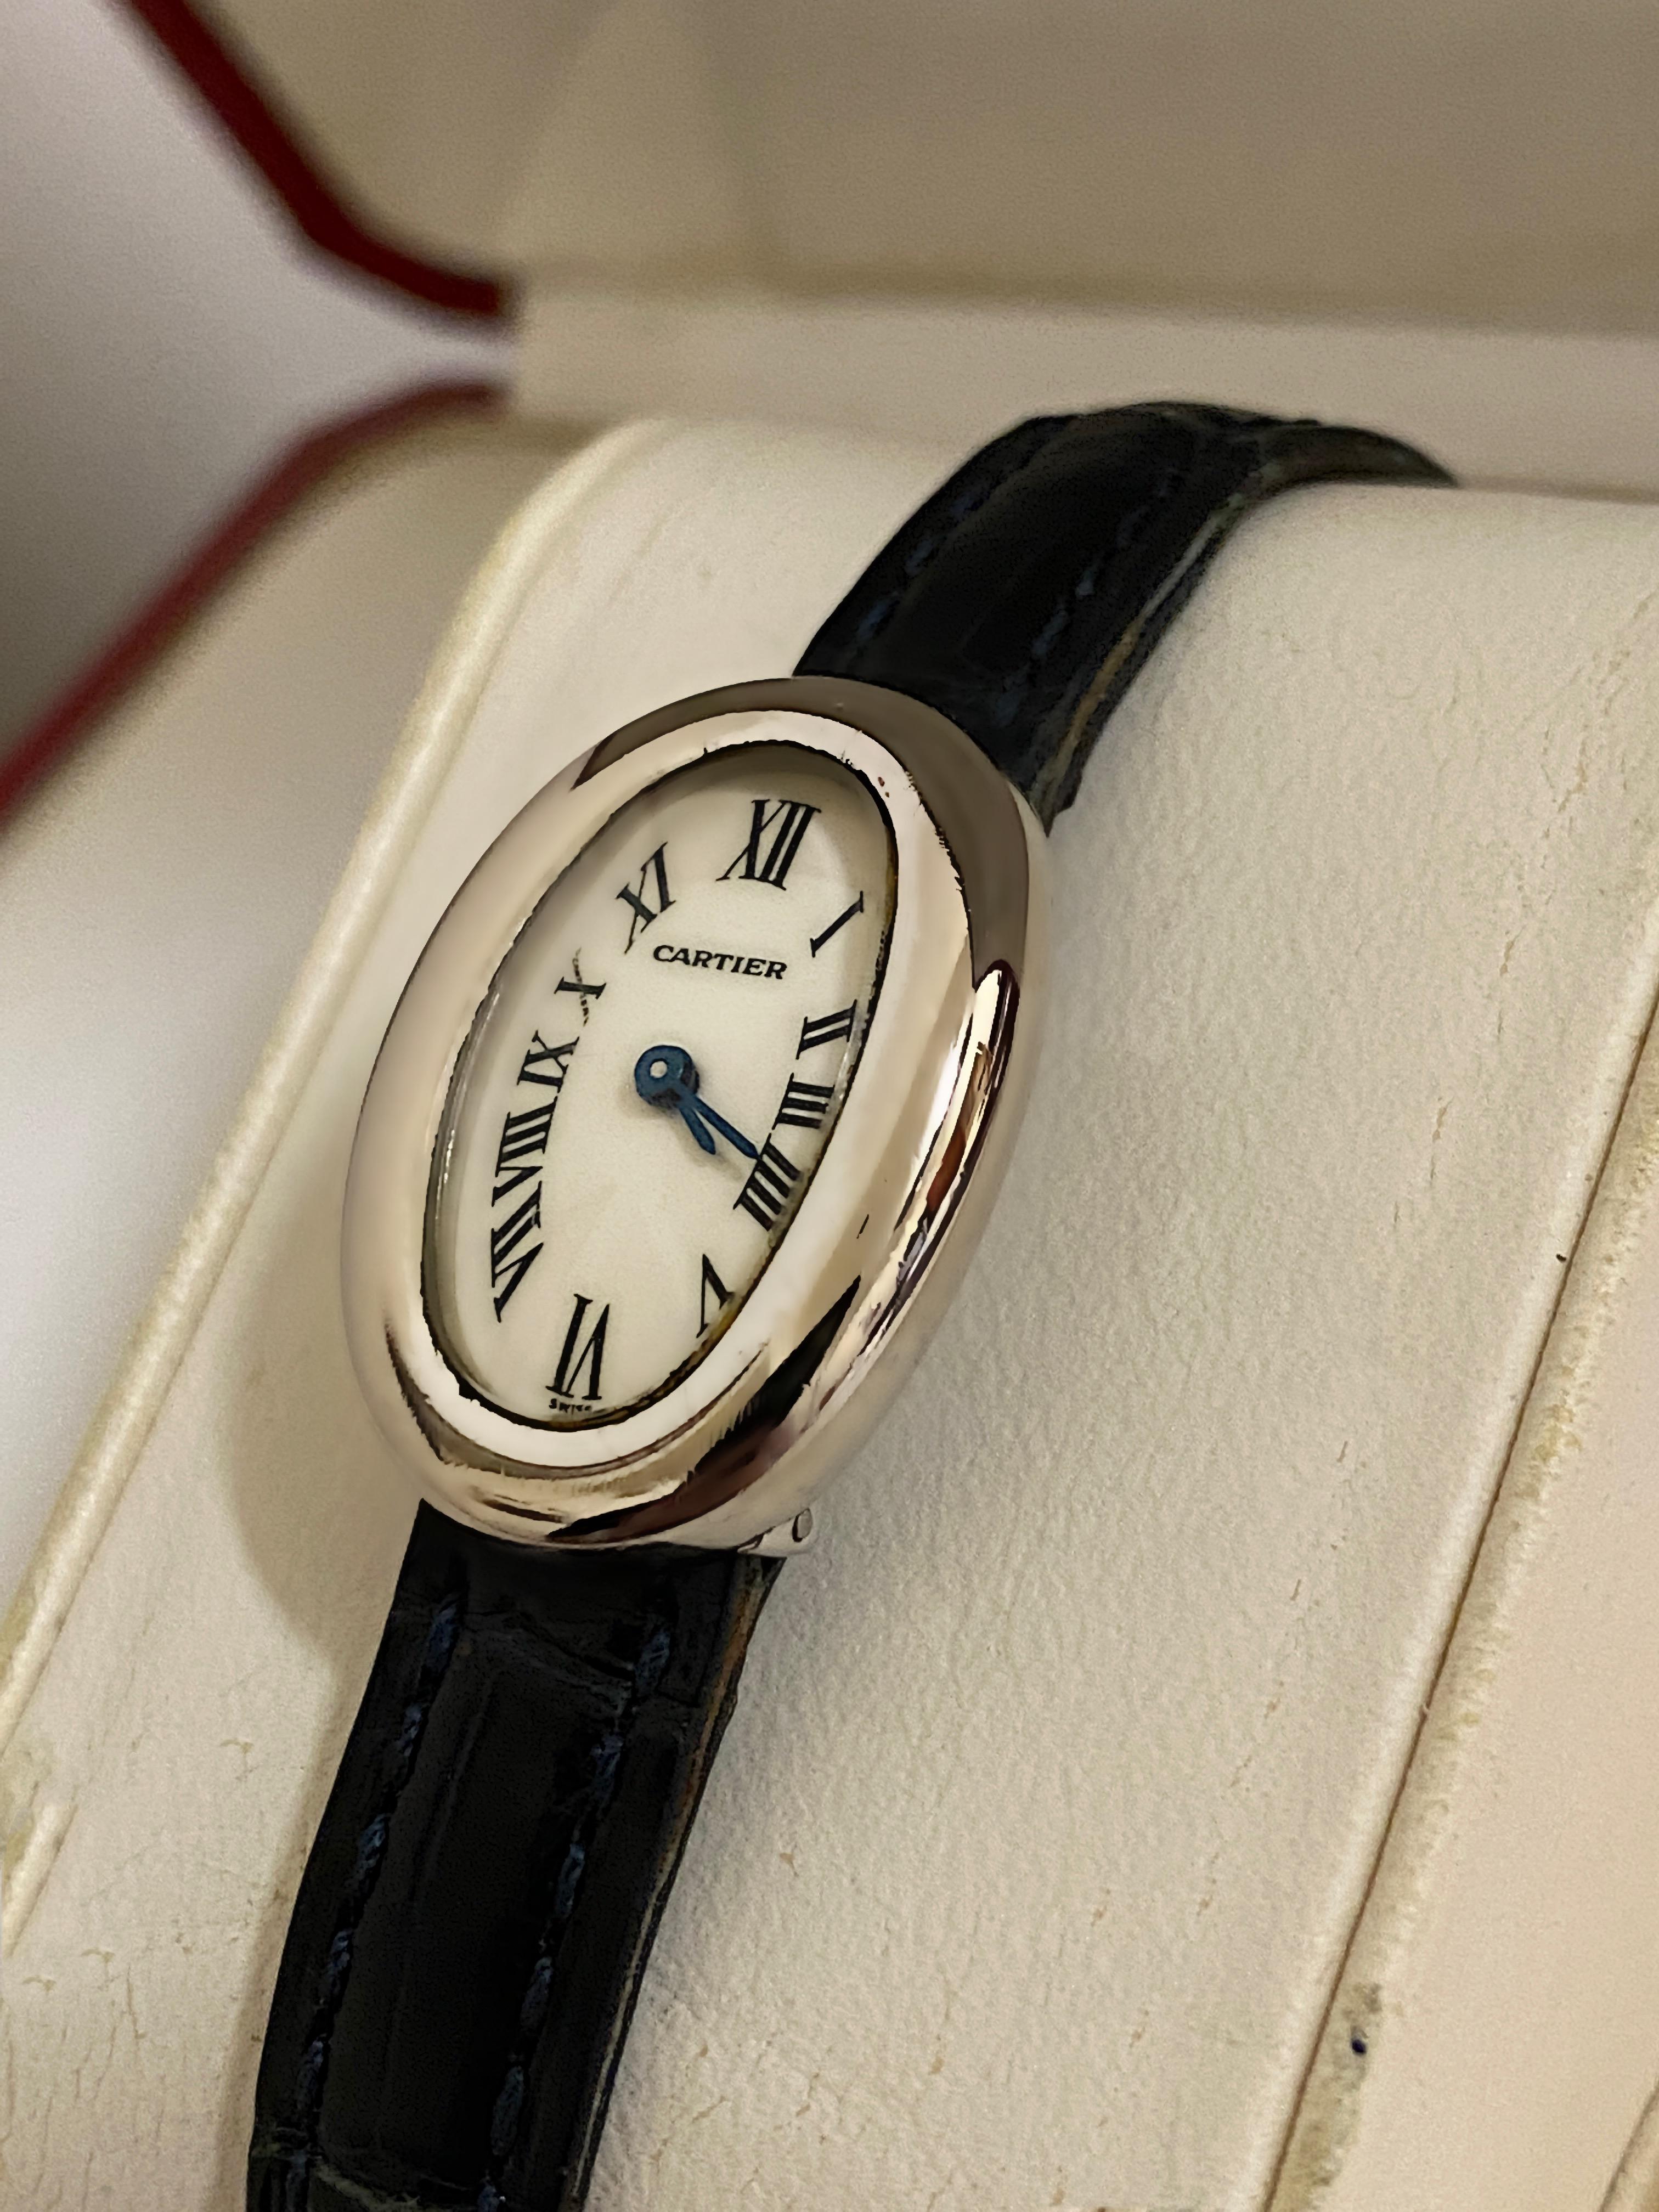 An elegant & timeless Cartier Baignoire Mini reference 2369

is a rarely seen & sought after ladies' timepiece, 

~~~~~~

It features 18K White Gold Oval Case - that's perfectly proportioned, measuring 25mm x 17mm; 

signed & numbered: ref 2369,